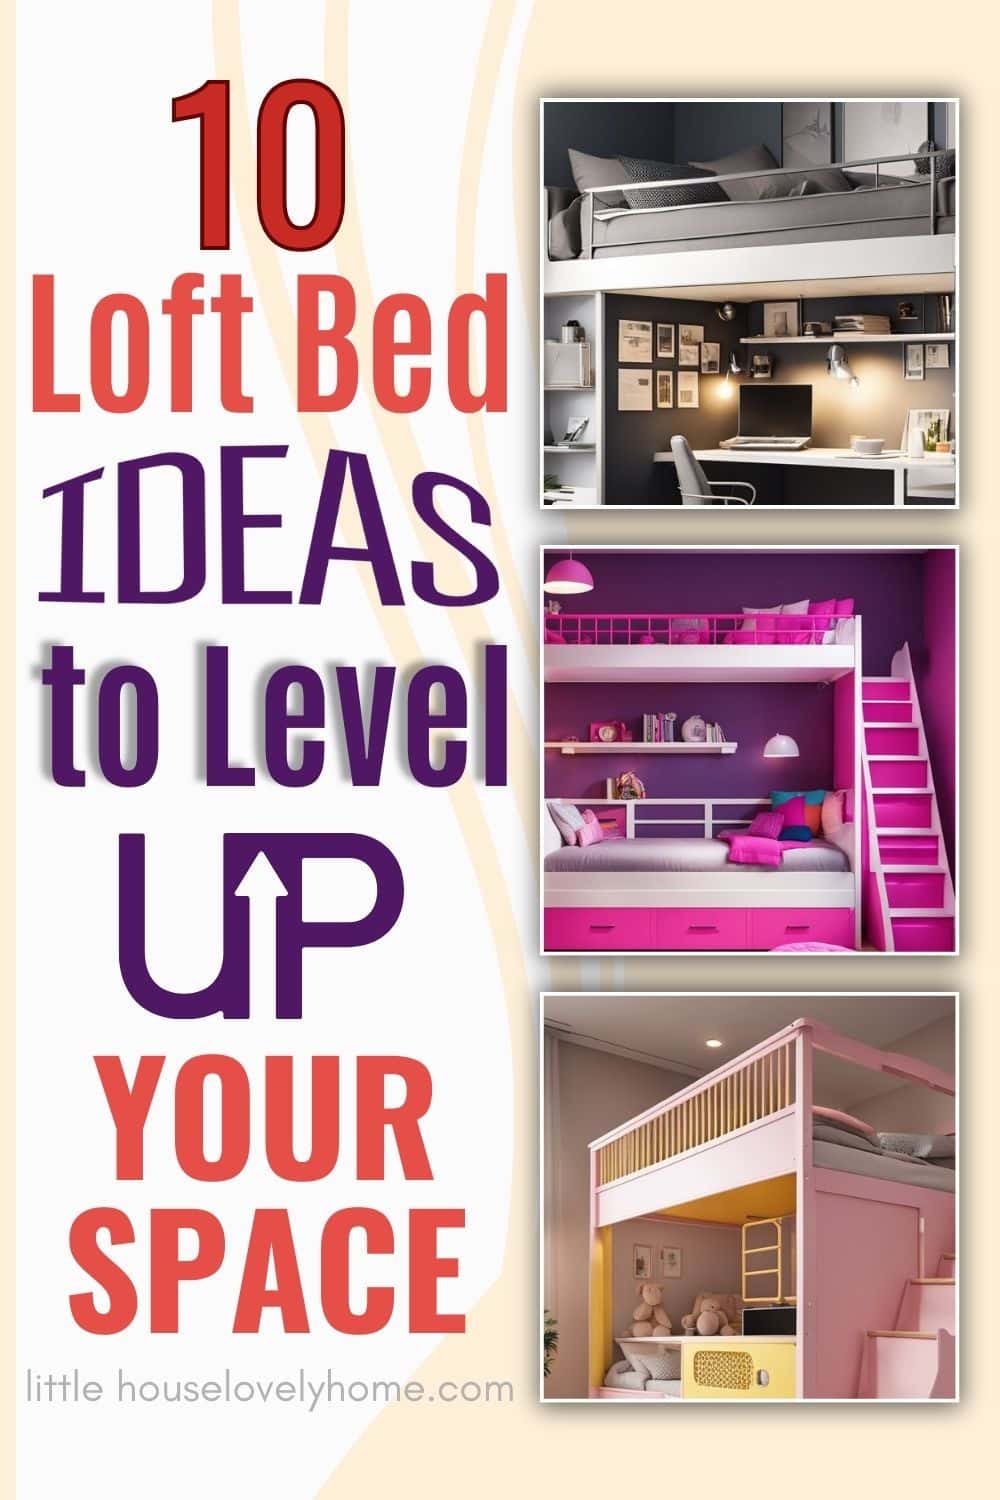 10 Loft Bed Ideas for Every Room to Level Up Your Space Pin Image